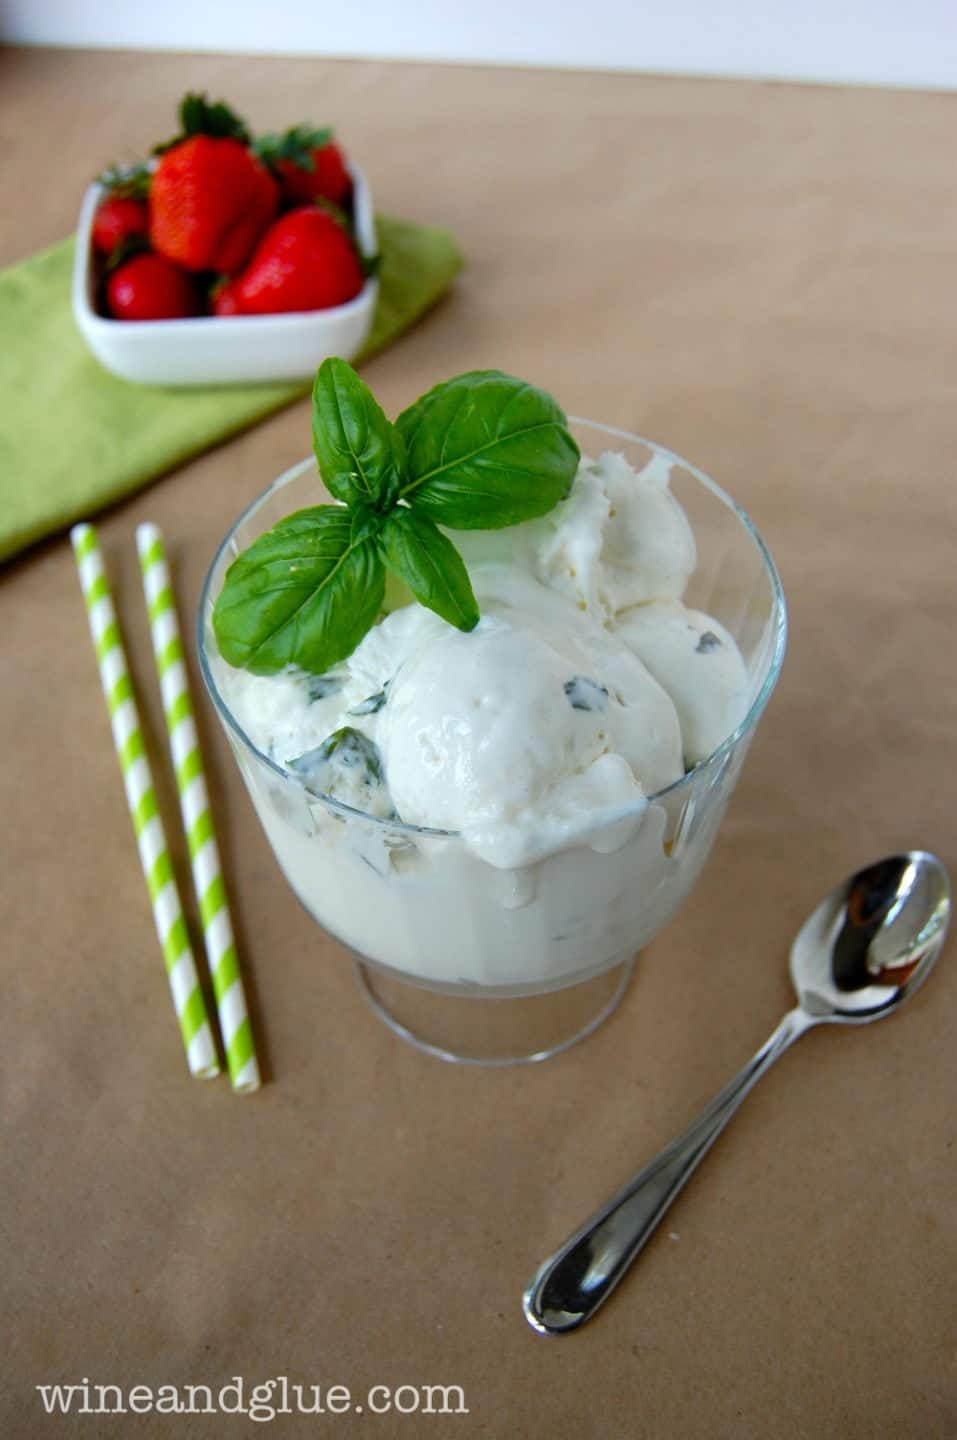 Basil Ice Cream! The delicious flavor of basil in sweet ice cream that comes together quickly without a machine! via www.wineandglue.com